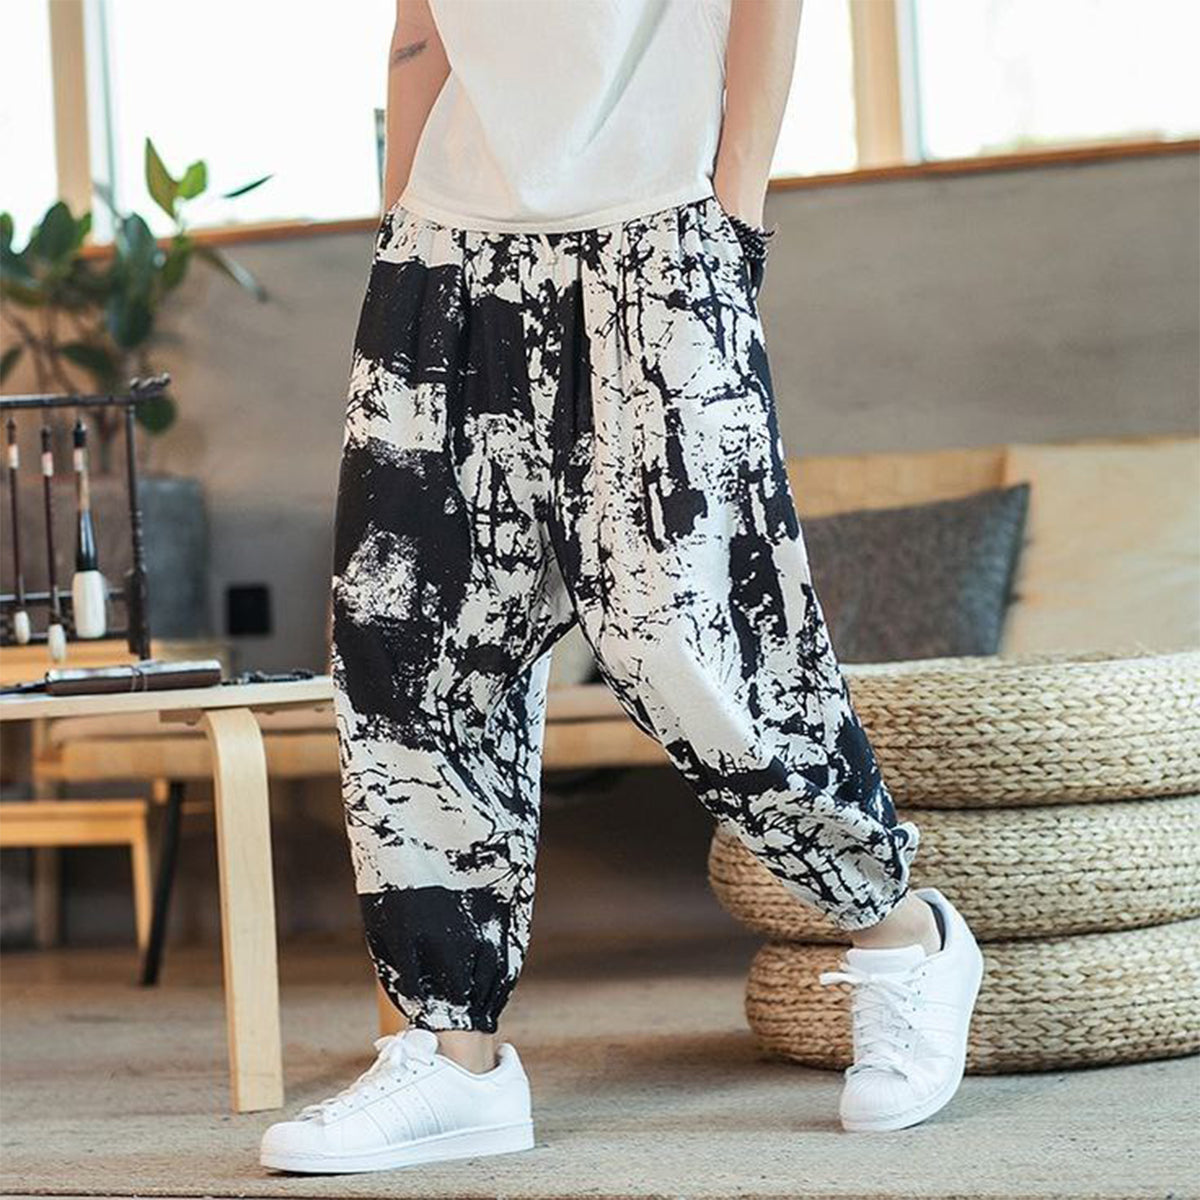 Men's Pants Loose Geomatric & Abstract Black n White Prints Jogger Breathable Casual Harem Combo (Pack of 2)